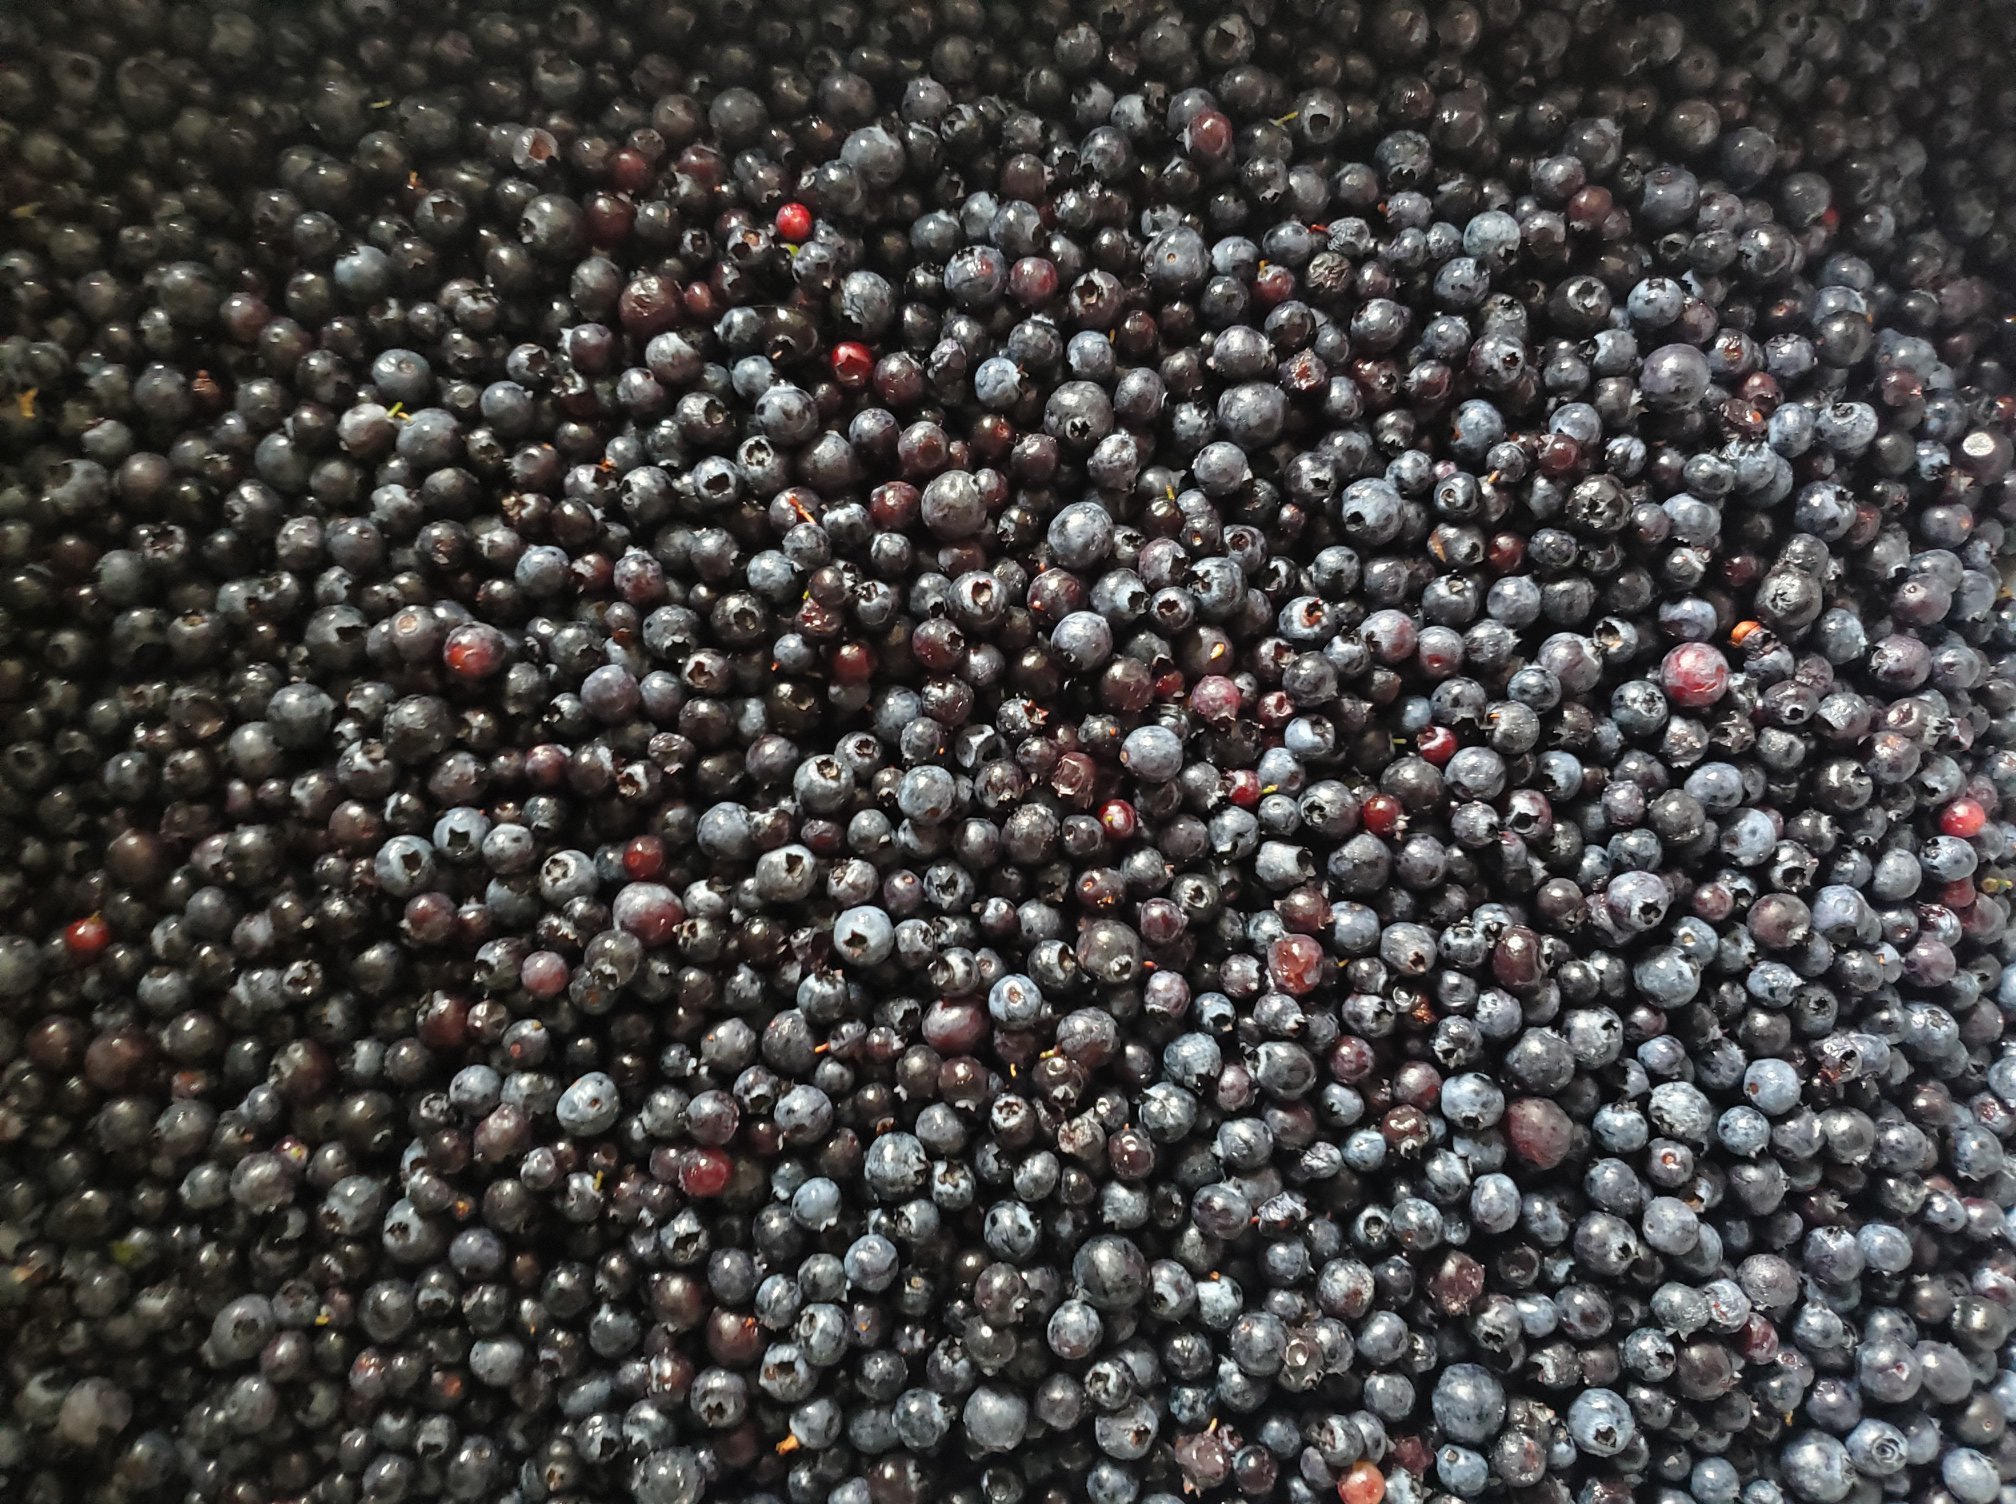 a frame filled entirely with picked wild blueberries from the Nipigon Blueberry Blast Festival